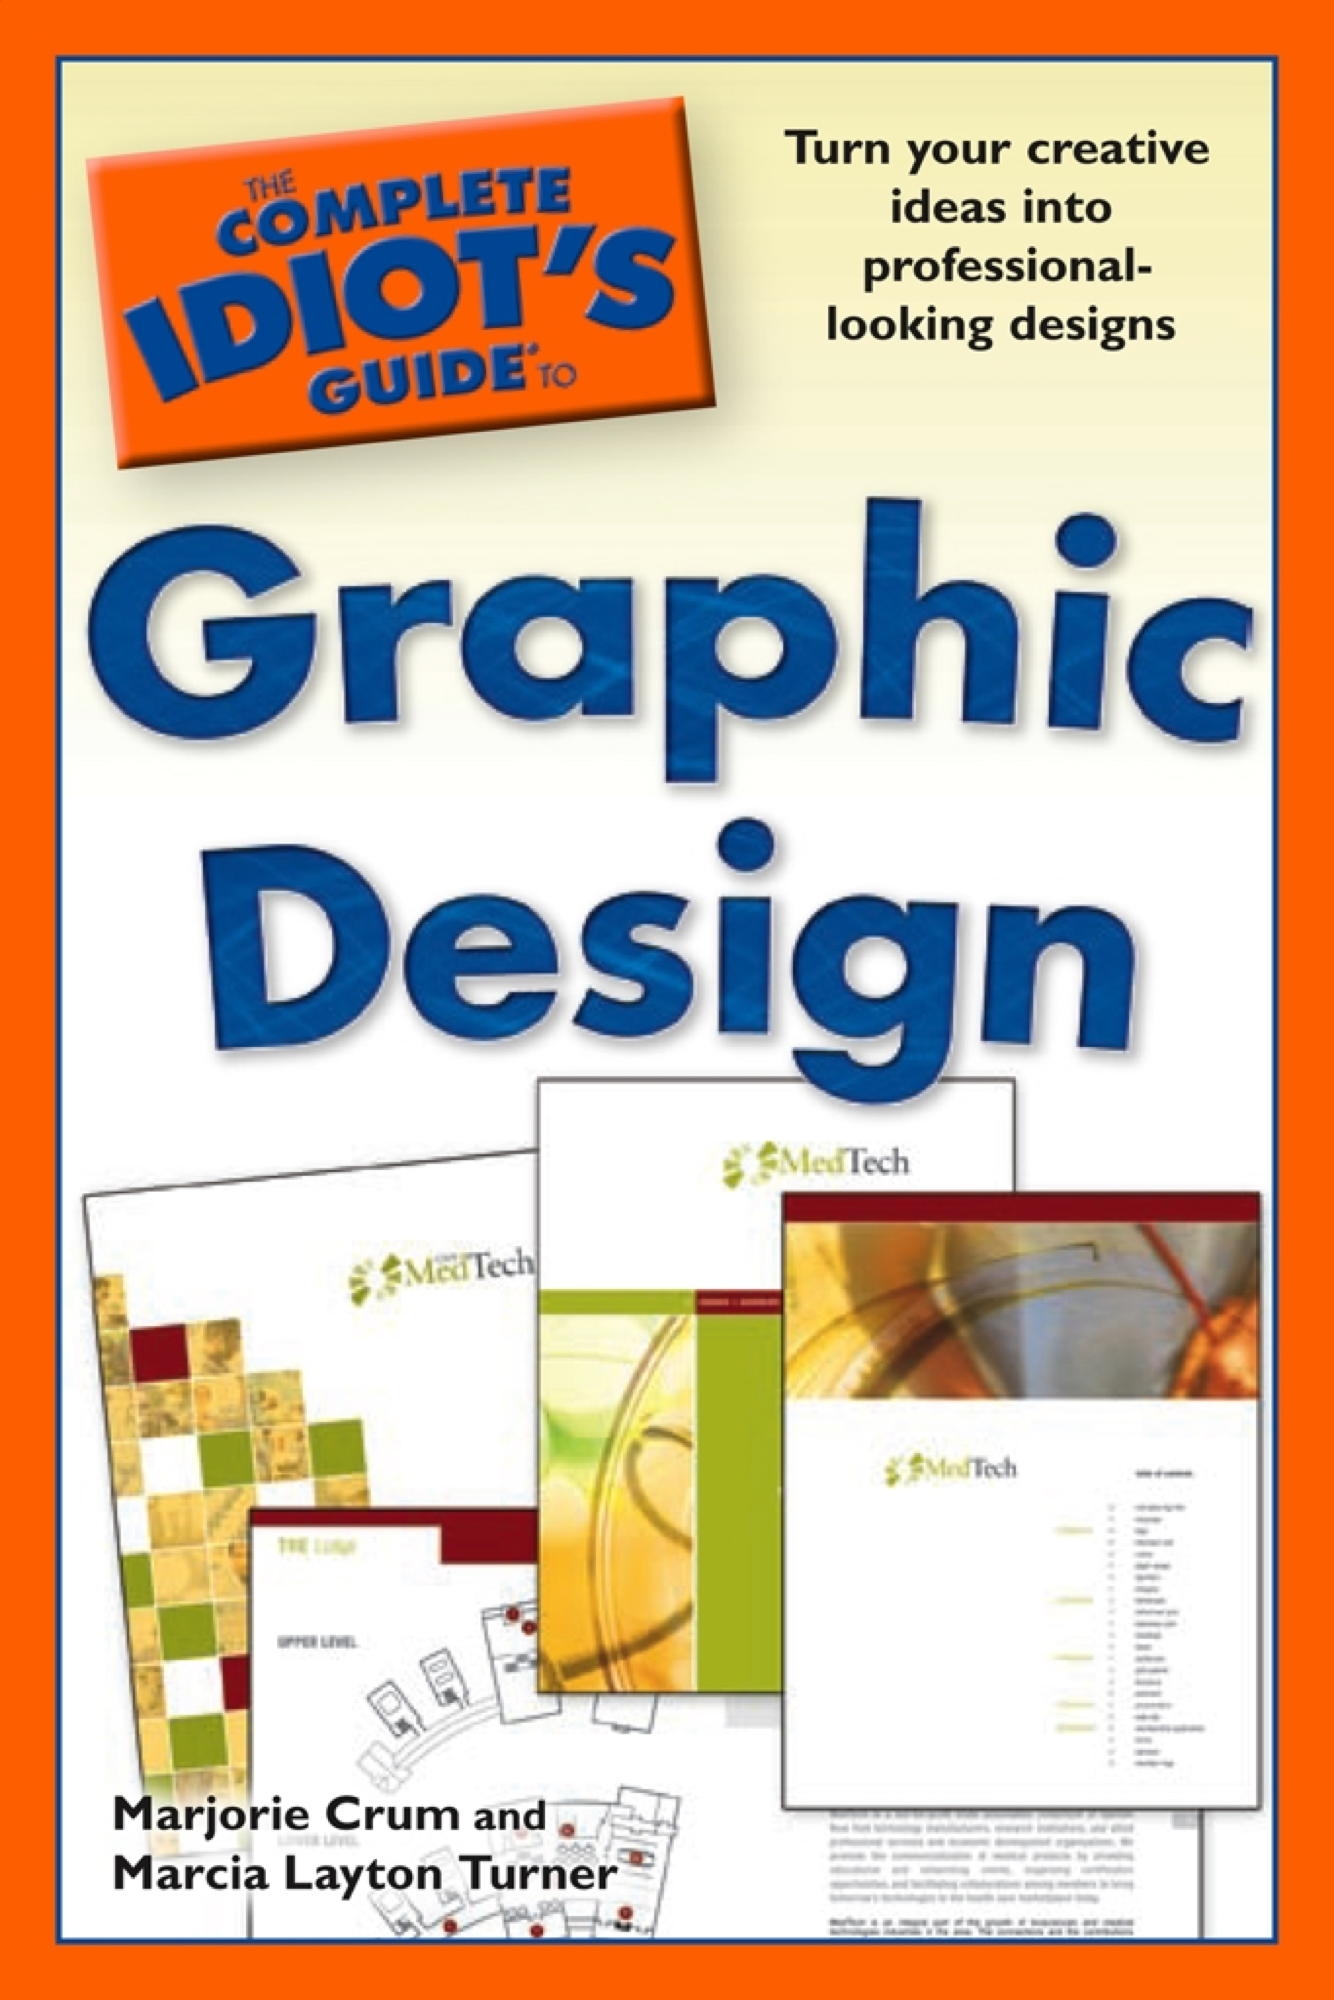 The Complete Idiot's Guide to Graphic Design